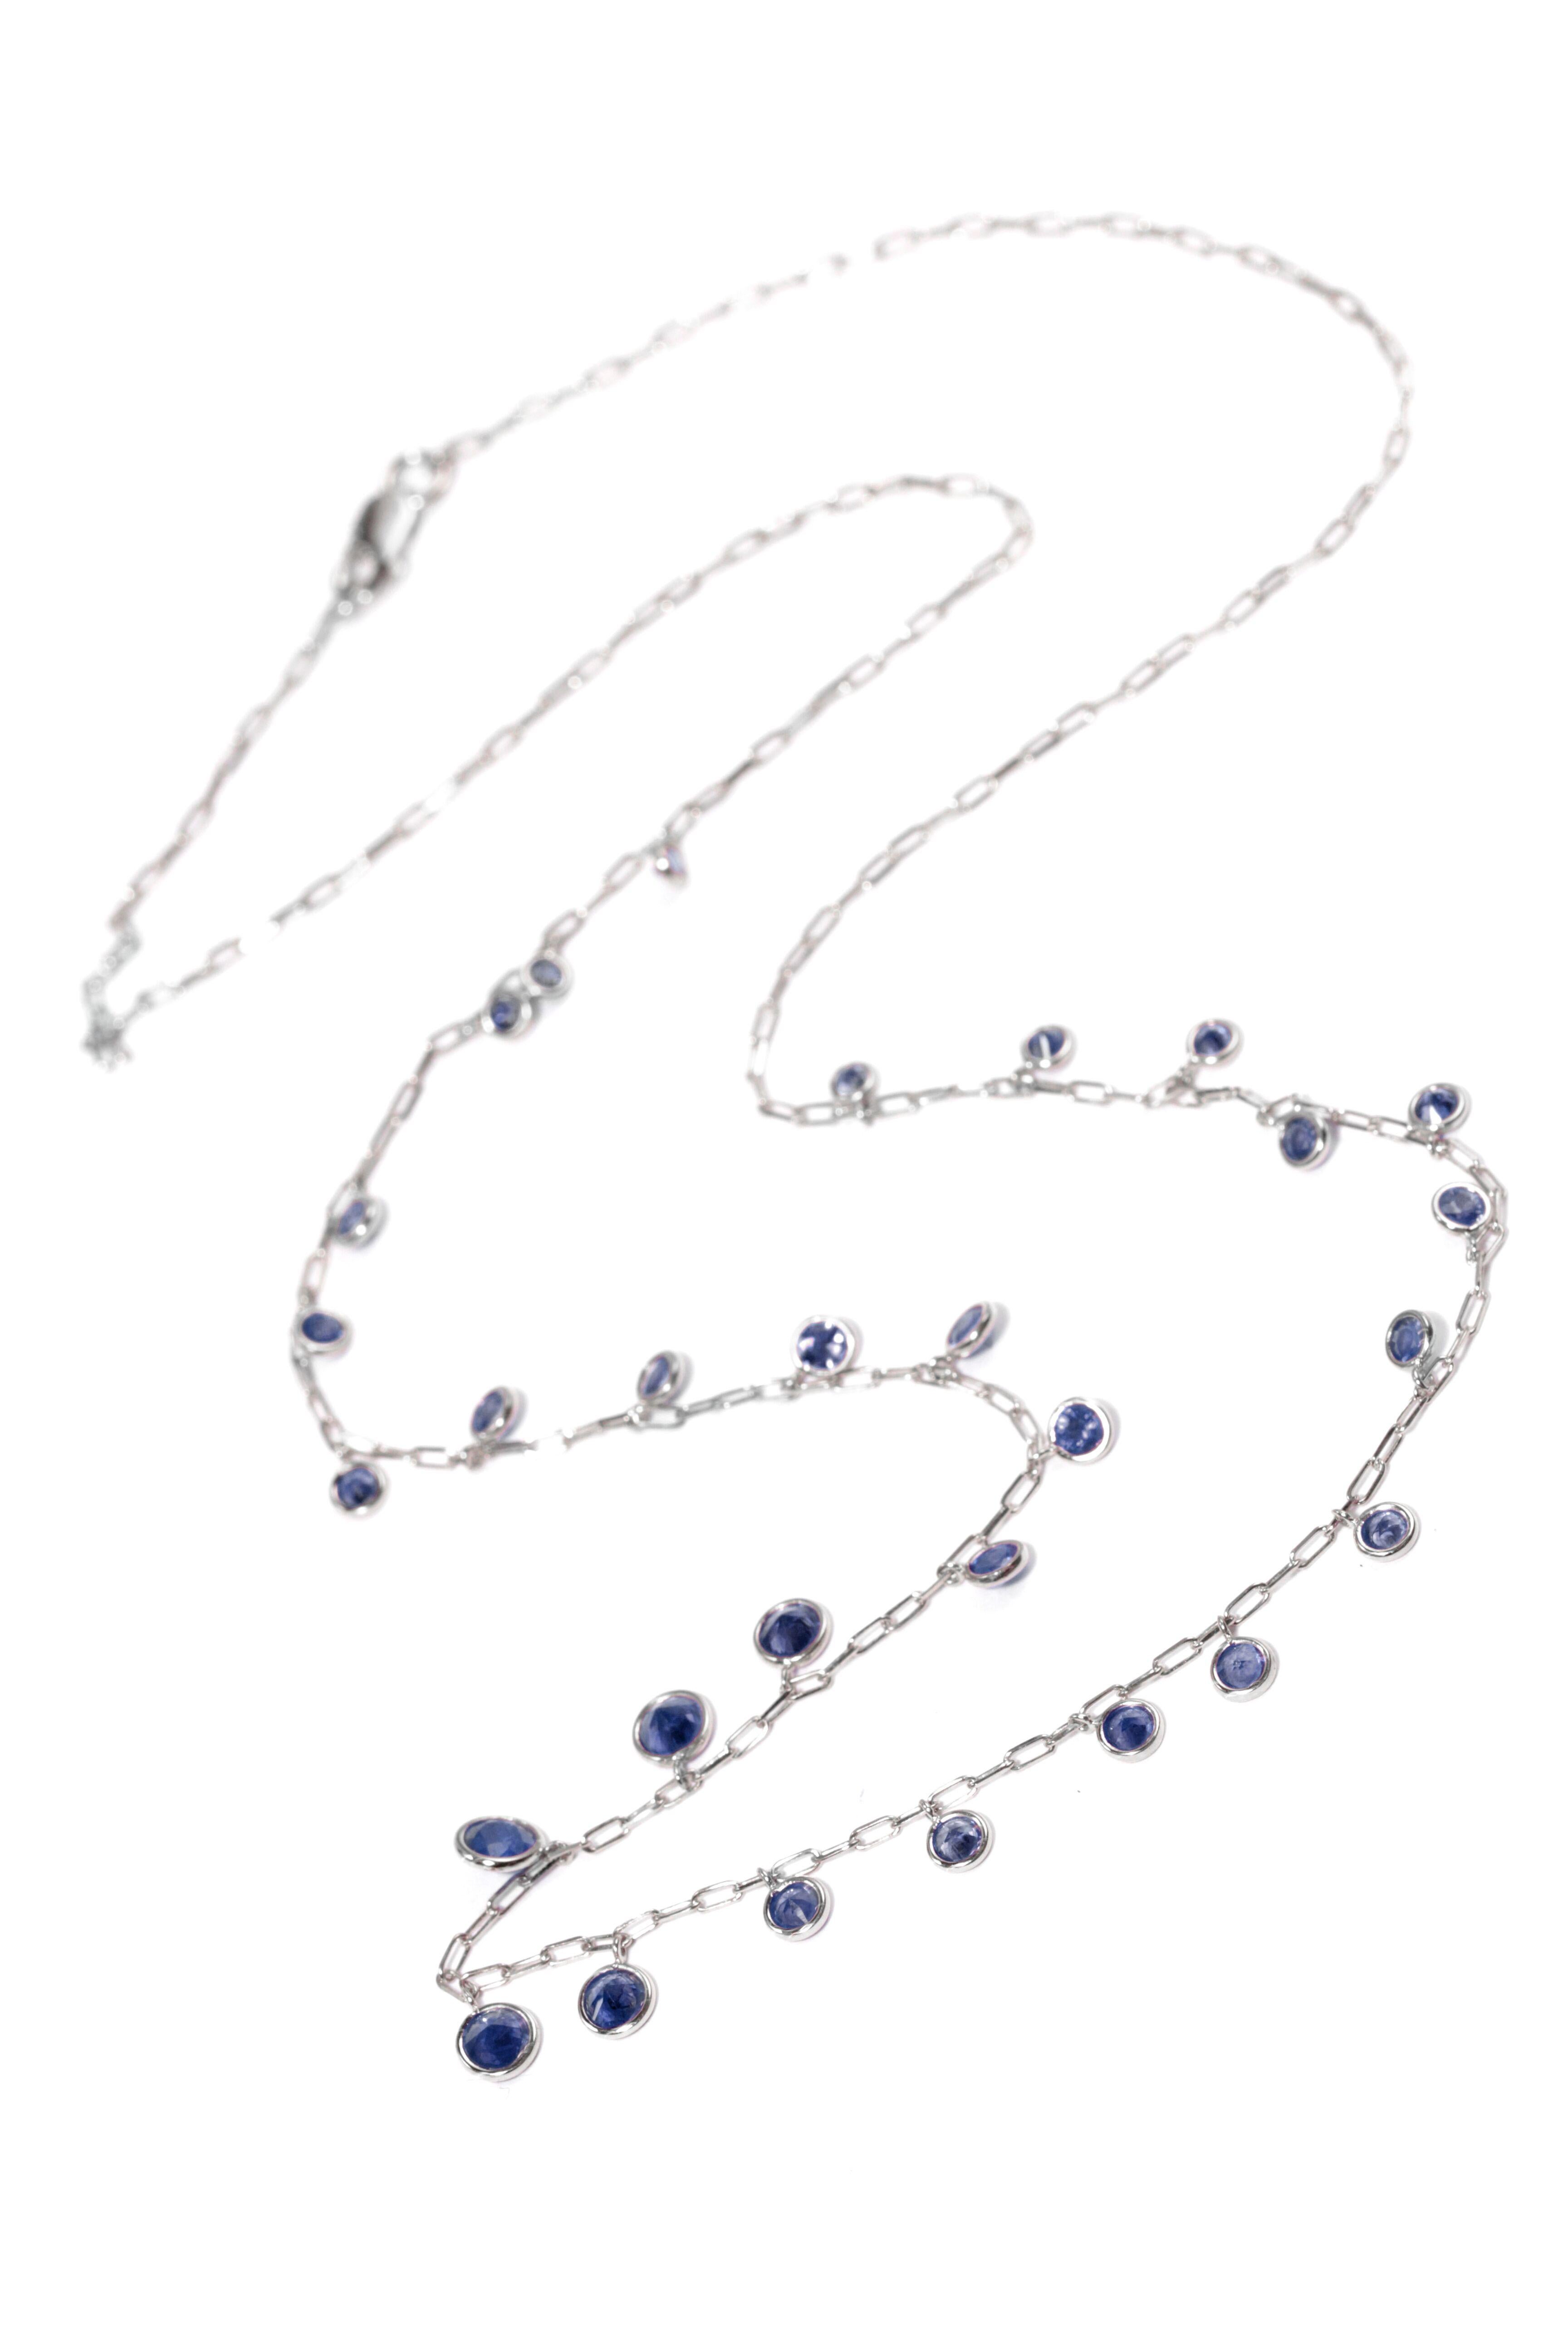 Oval Cut Blue Sapphire 3, 81ct & 18k White Gold Necklace For Sale